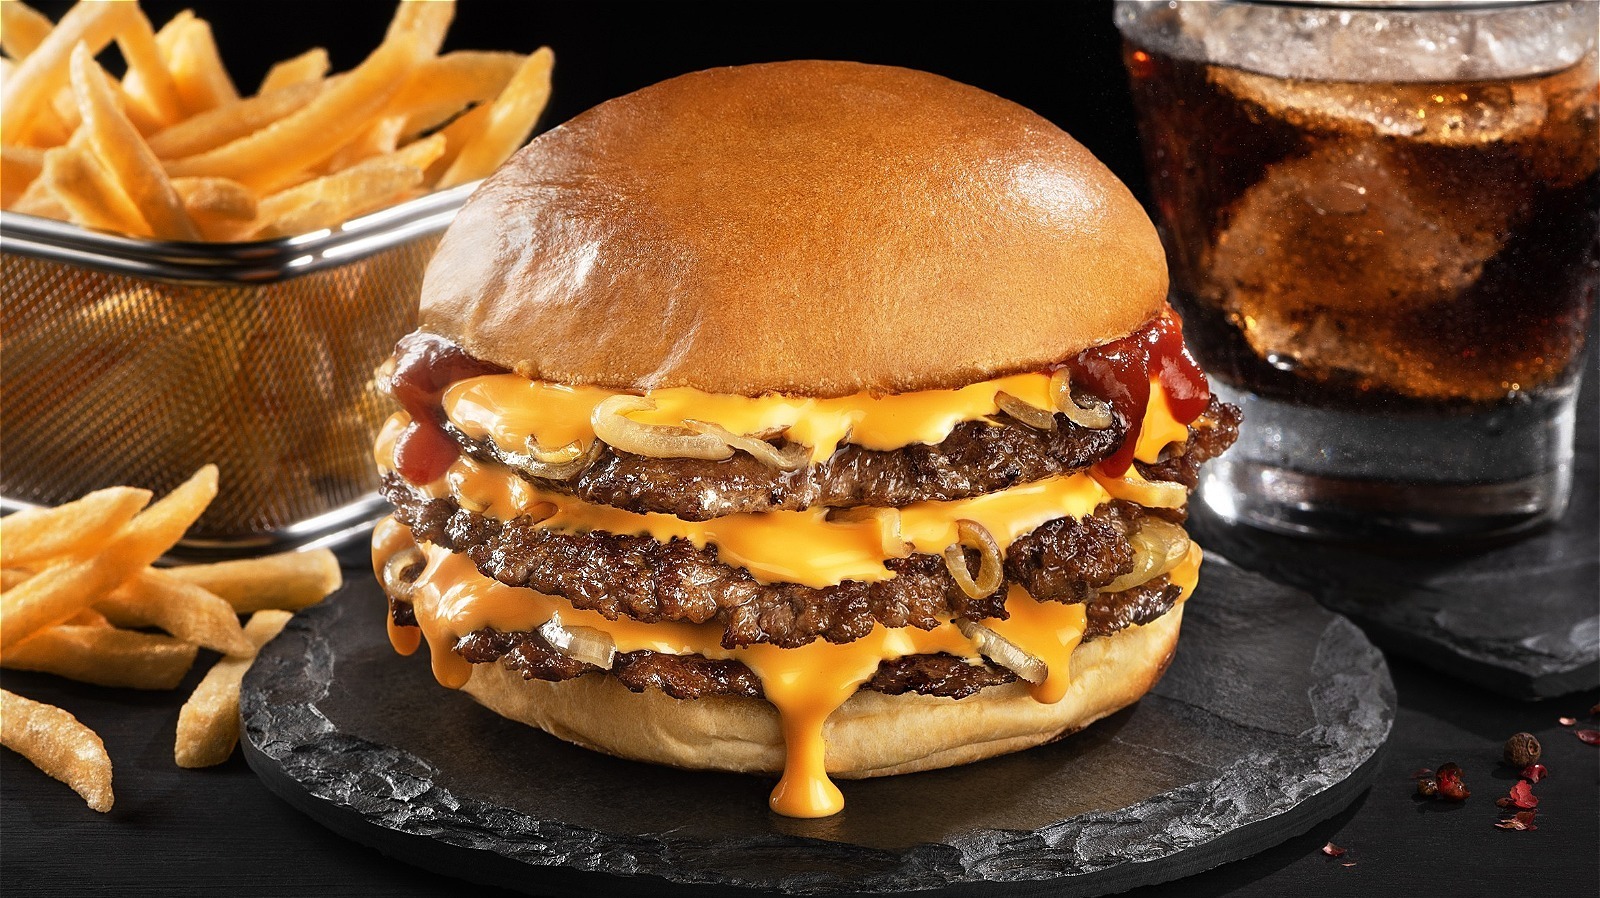 National Cheeseburger Day deals, discounts, freebies on Monday